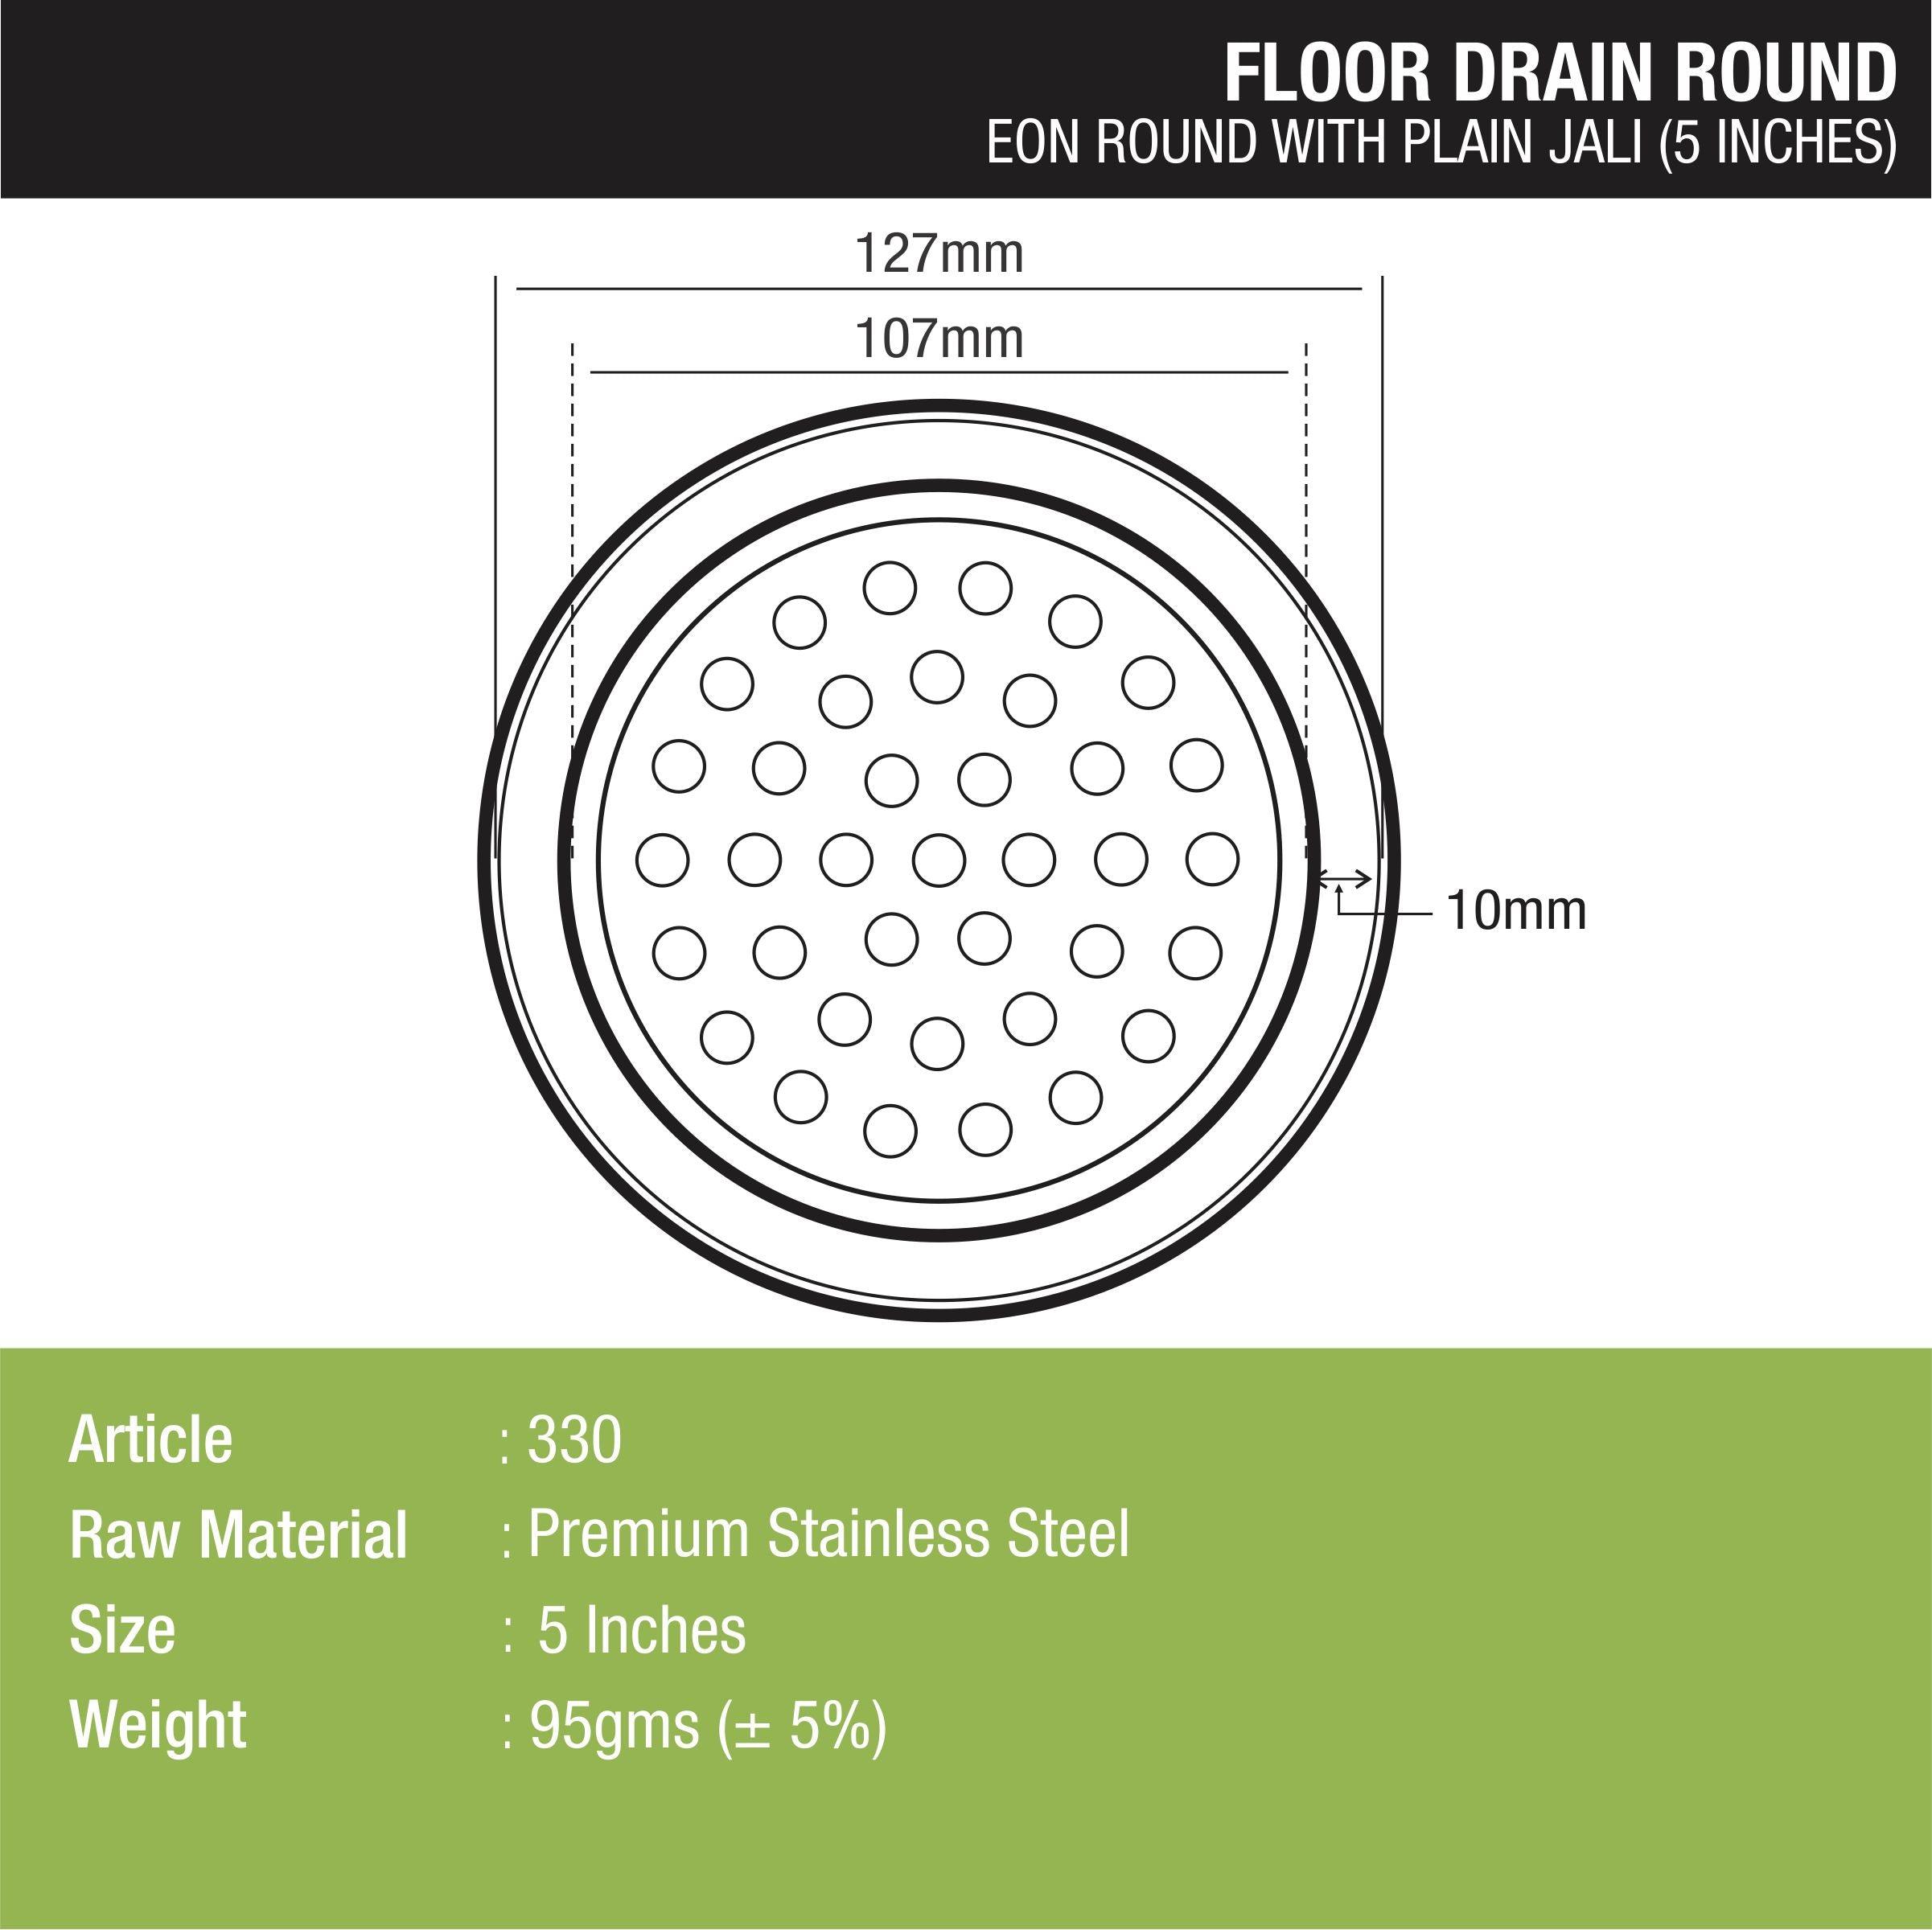 Eon Round Floor Drain with Plain Jali (5 inches) dimensions and sizes